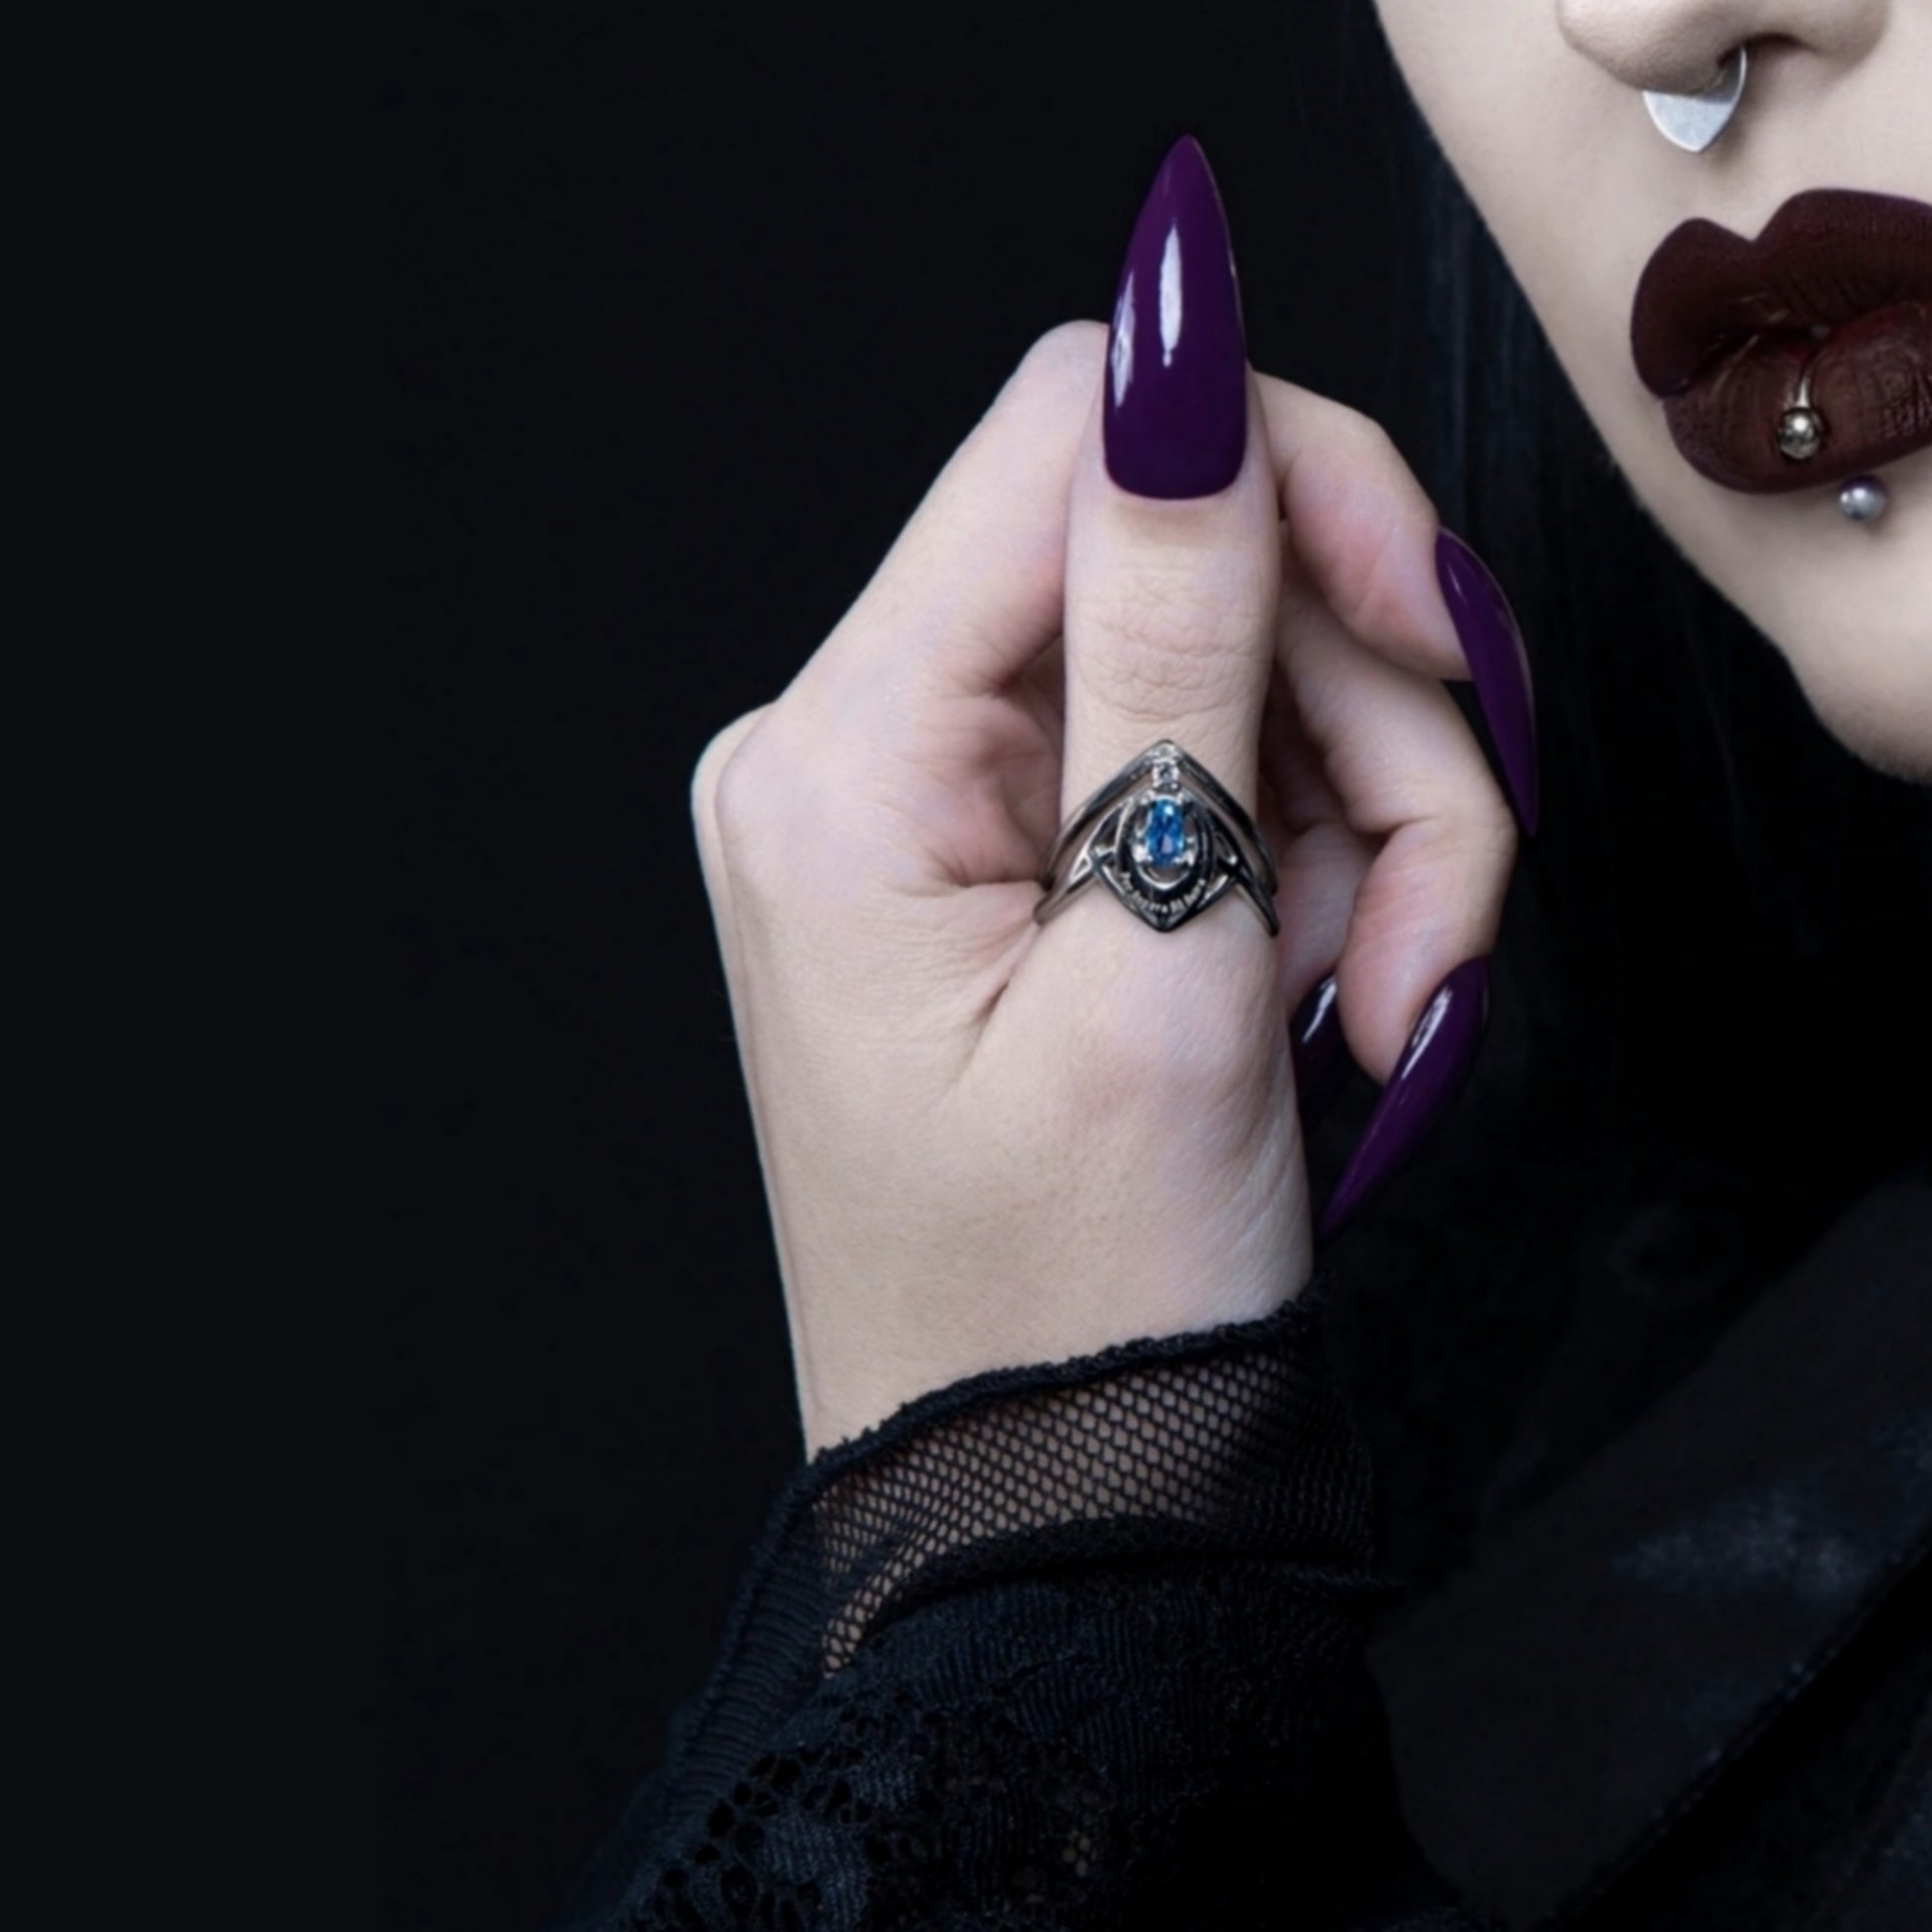 Mirror Stainless Steel Ring | Zenith Sky & Pale Blue Spinel Stones - Rogue + Wolf - Rings